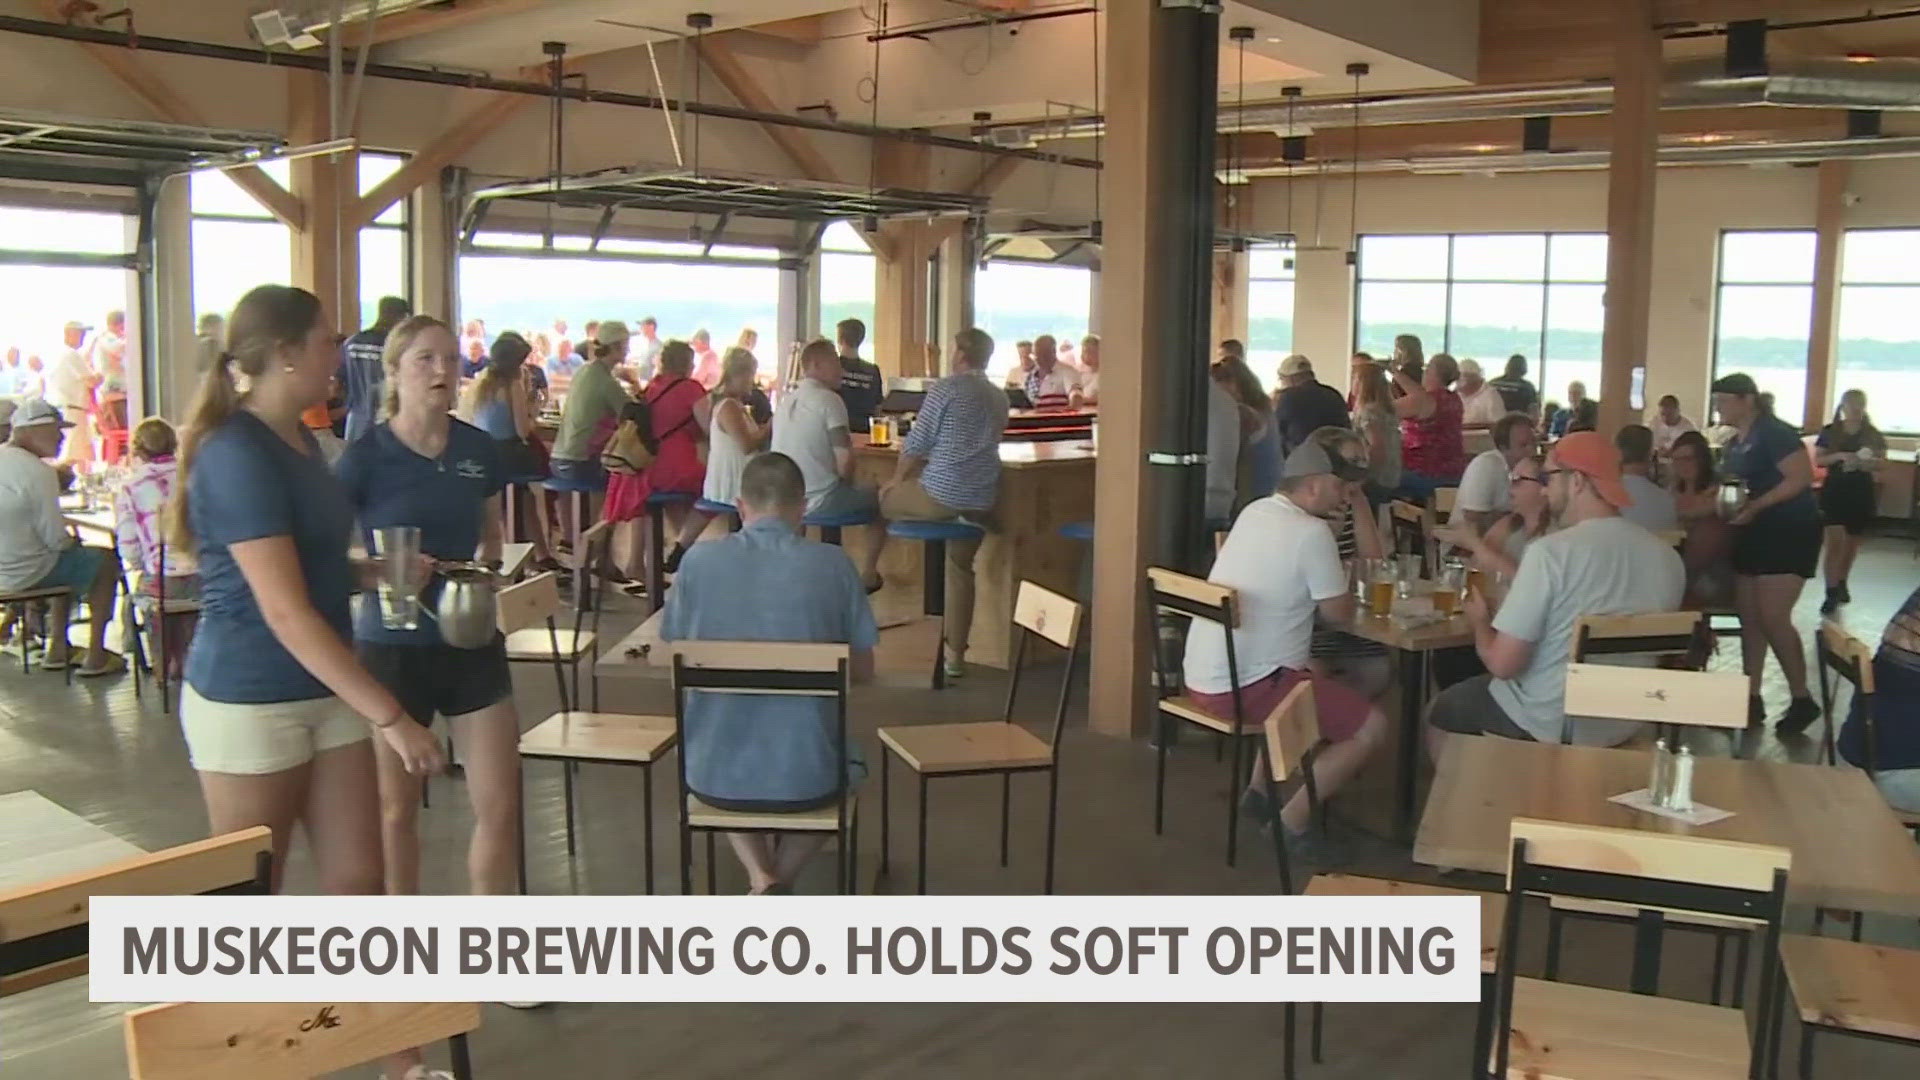 The owners of Muskegon Brewing Company were happy to welcome patrons to a soft opening on the Fourth of July.